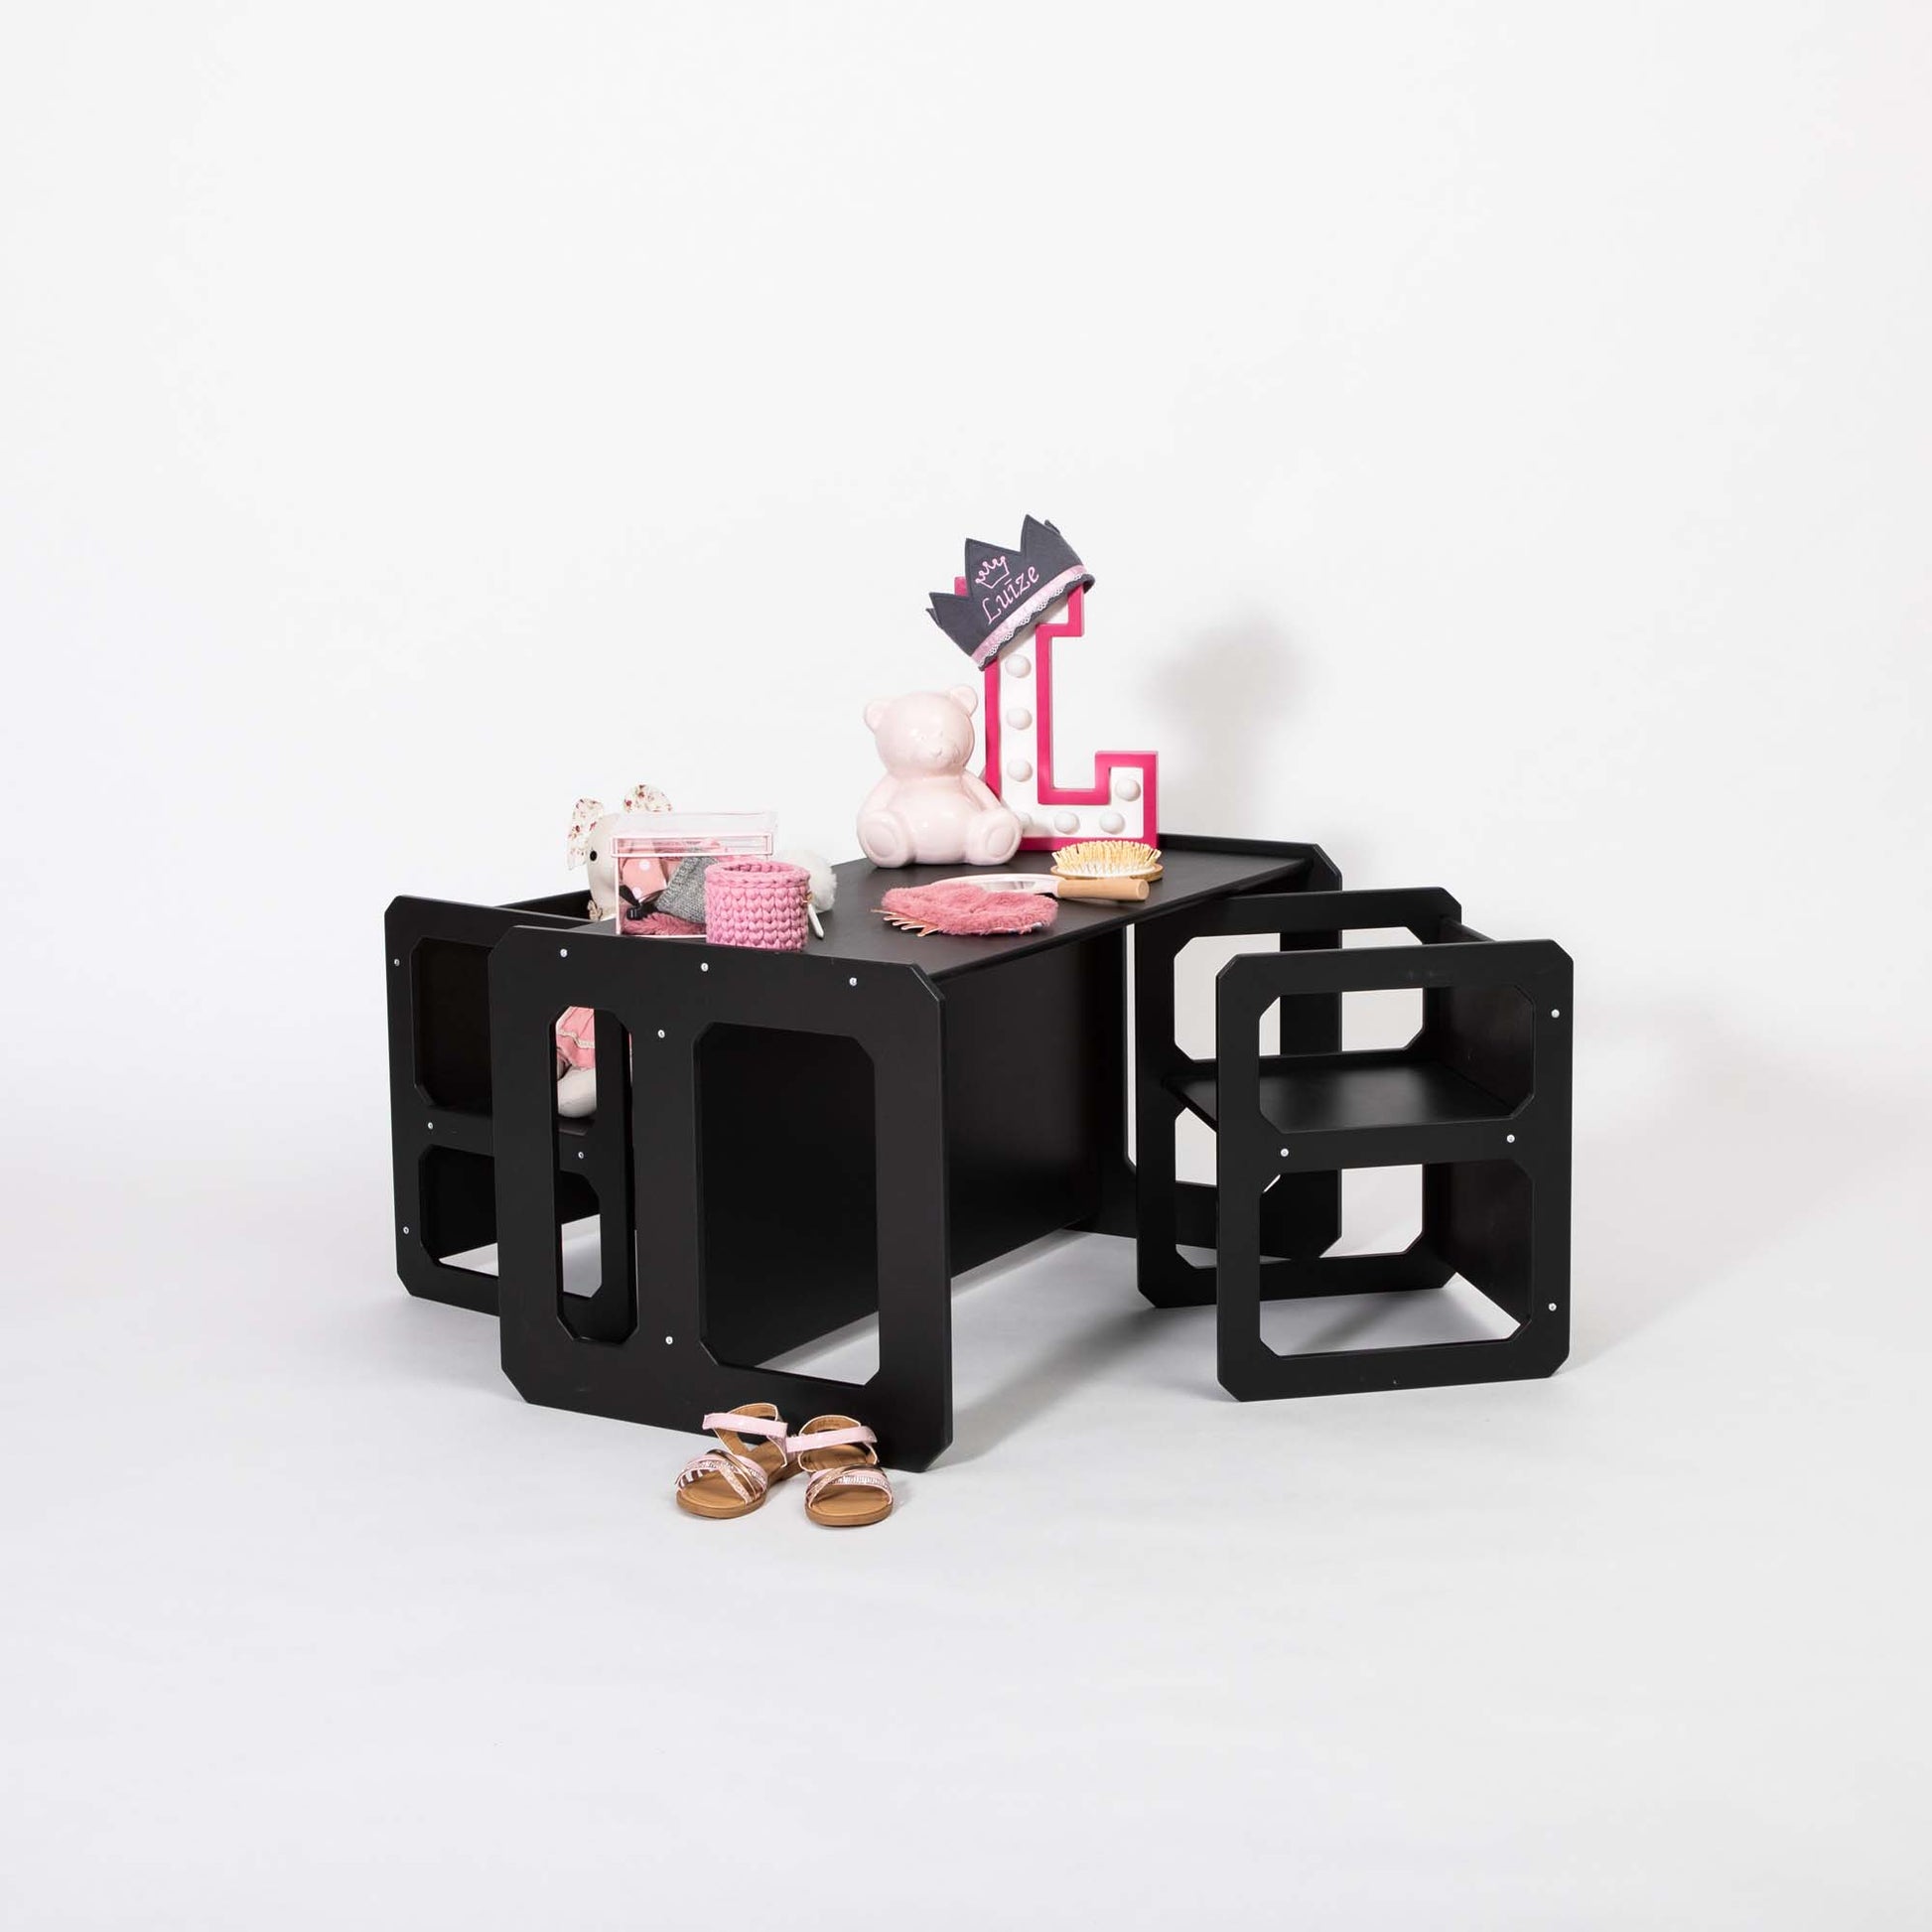 The Montessori weaning table and 2 chair set, black and modular, holds a variety of items including a teddy bear, children's shoes, a crown sign, and a small container of pink items. This setup is perfect for fostering toddler independence and fine motor skill development.